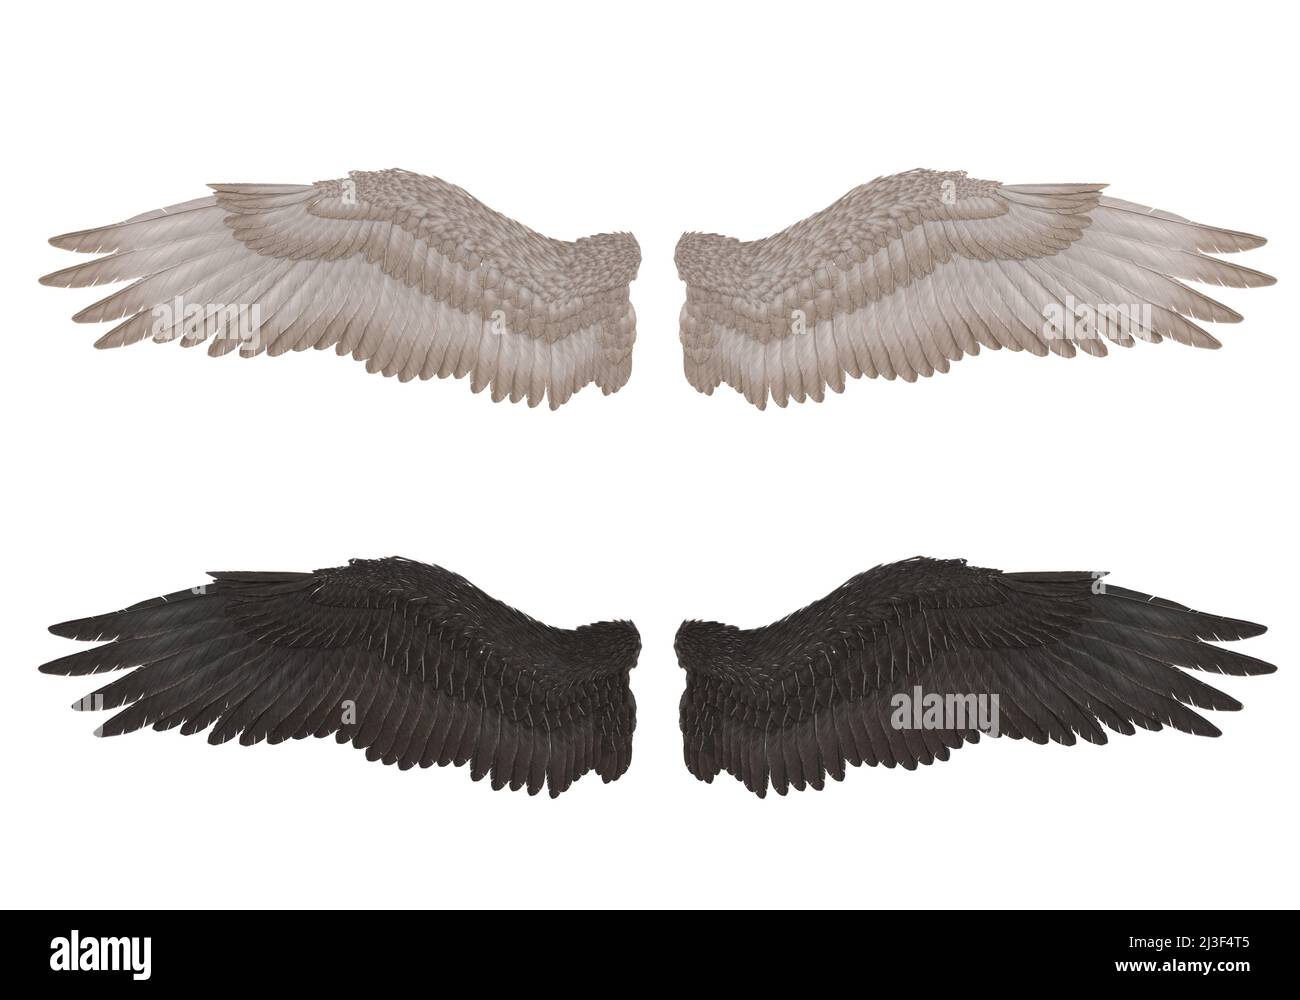 3D Render : Realistic isolated angel wings pair of falcon wings,wings design template Stock Photo